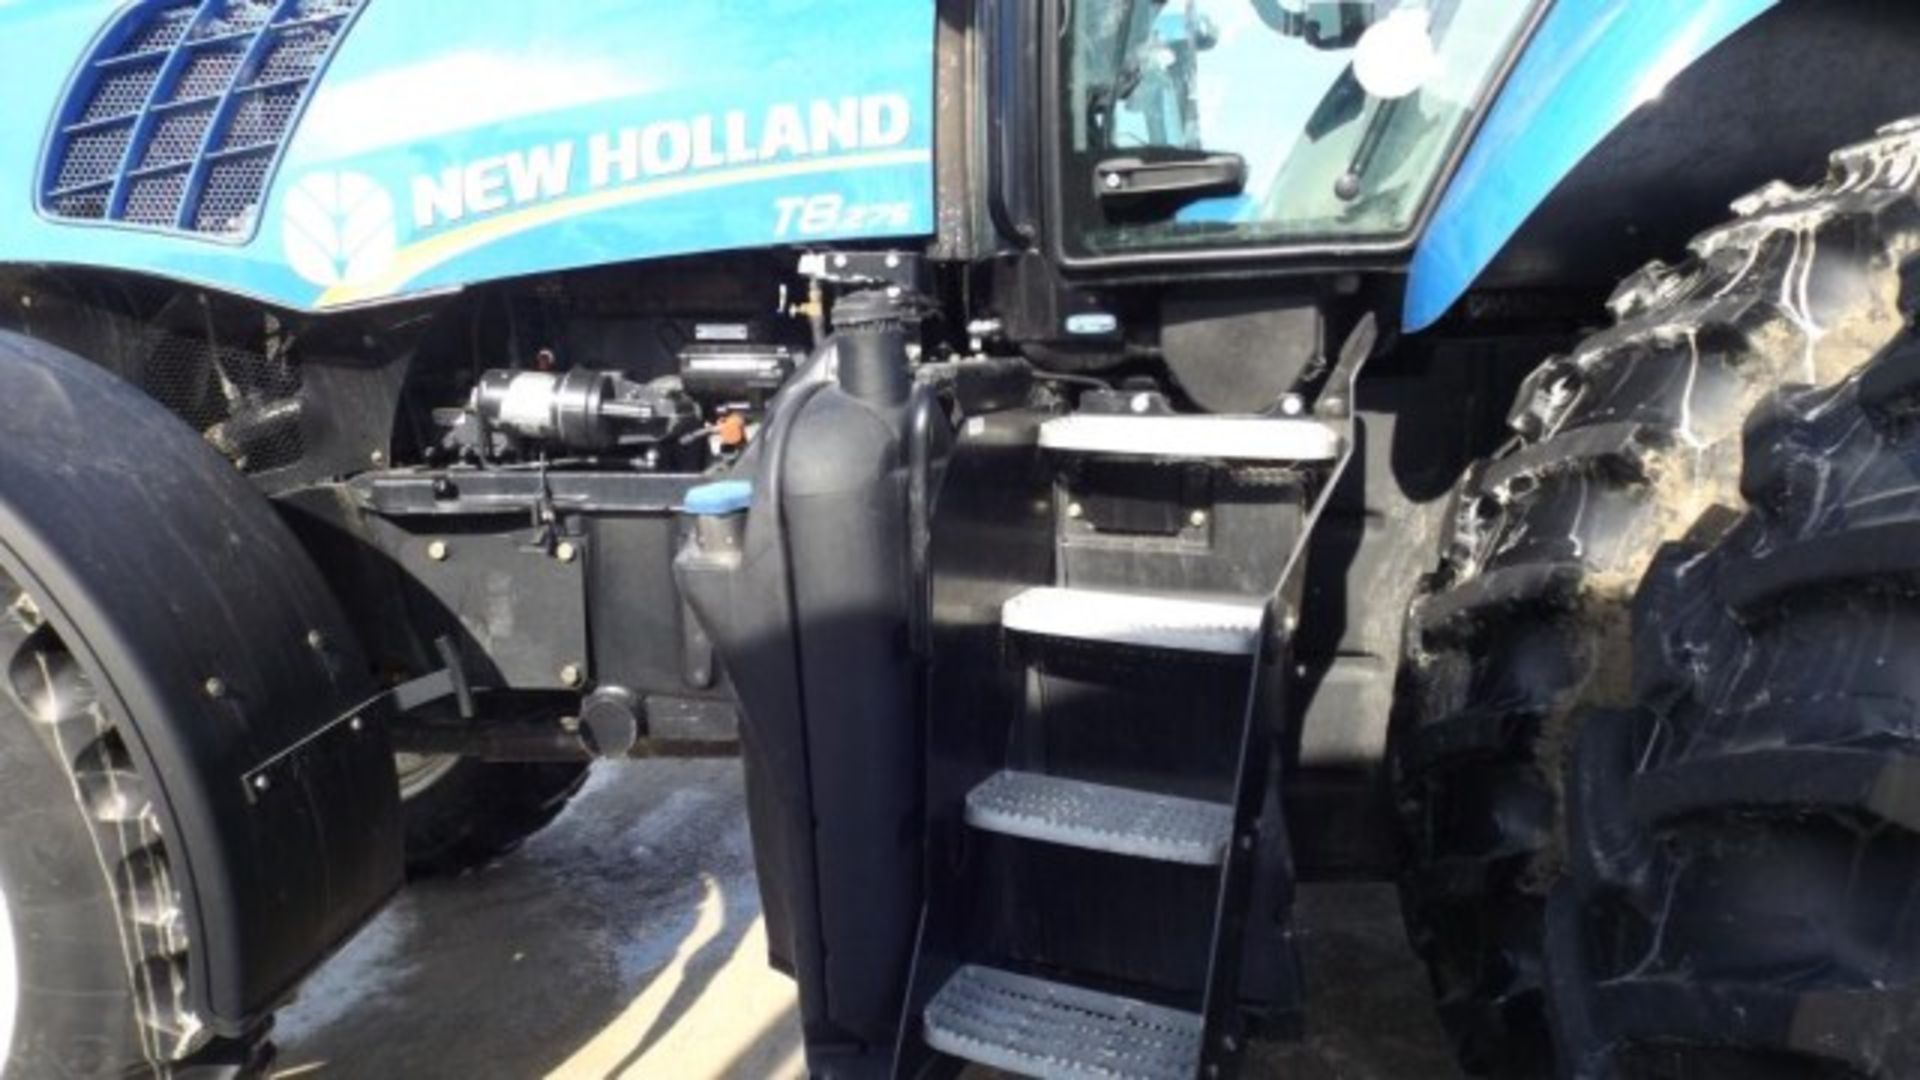 New Holland T8.275 Tractor '12, sn#ZCRC03823 2101 Hrs, MFWD, Deluxe Cab, Buddy Seat, 235 HP, 18/4 - Image 9 of 18